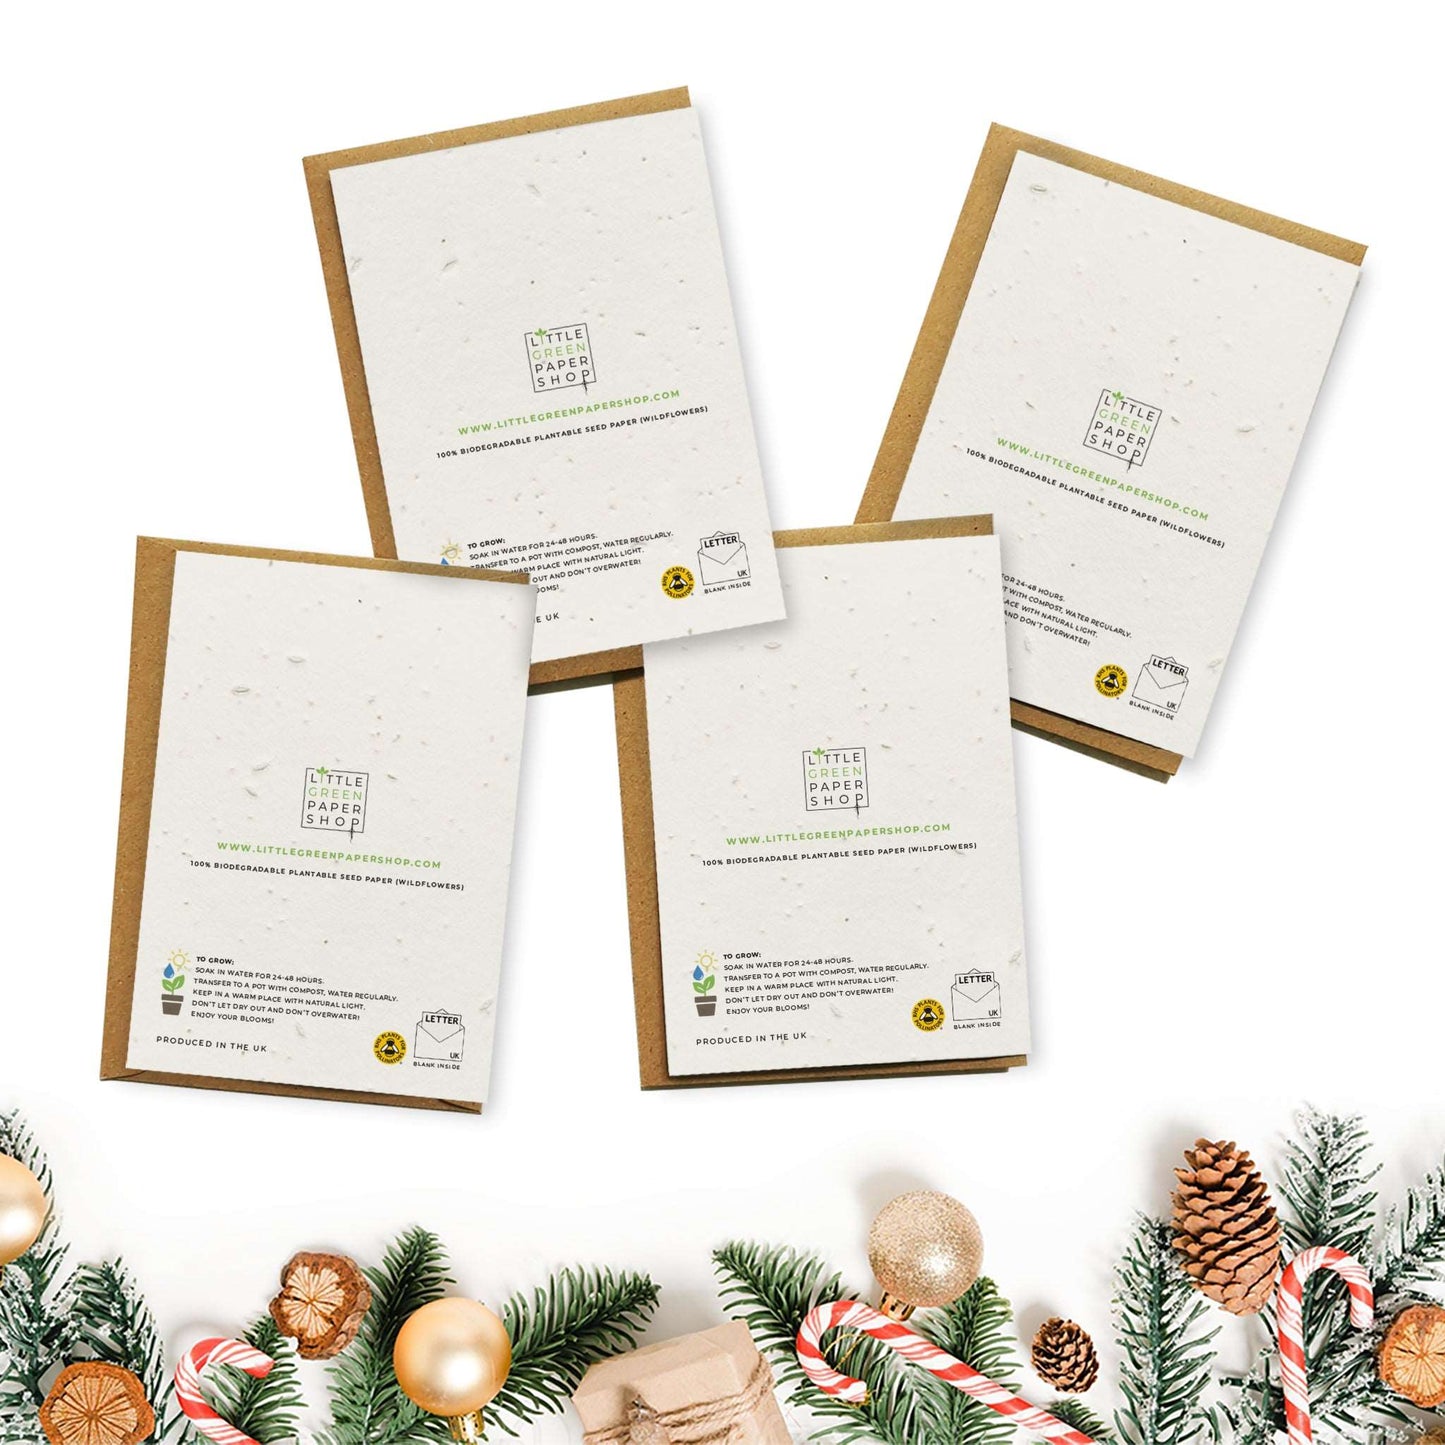 Plantable Seed Paper Christmas Cards 4-Pack - Christmas is all around Greeting Card Little Green Paper Shop